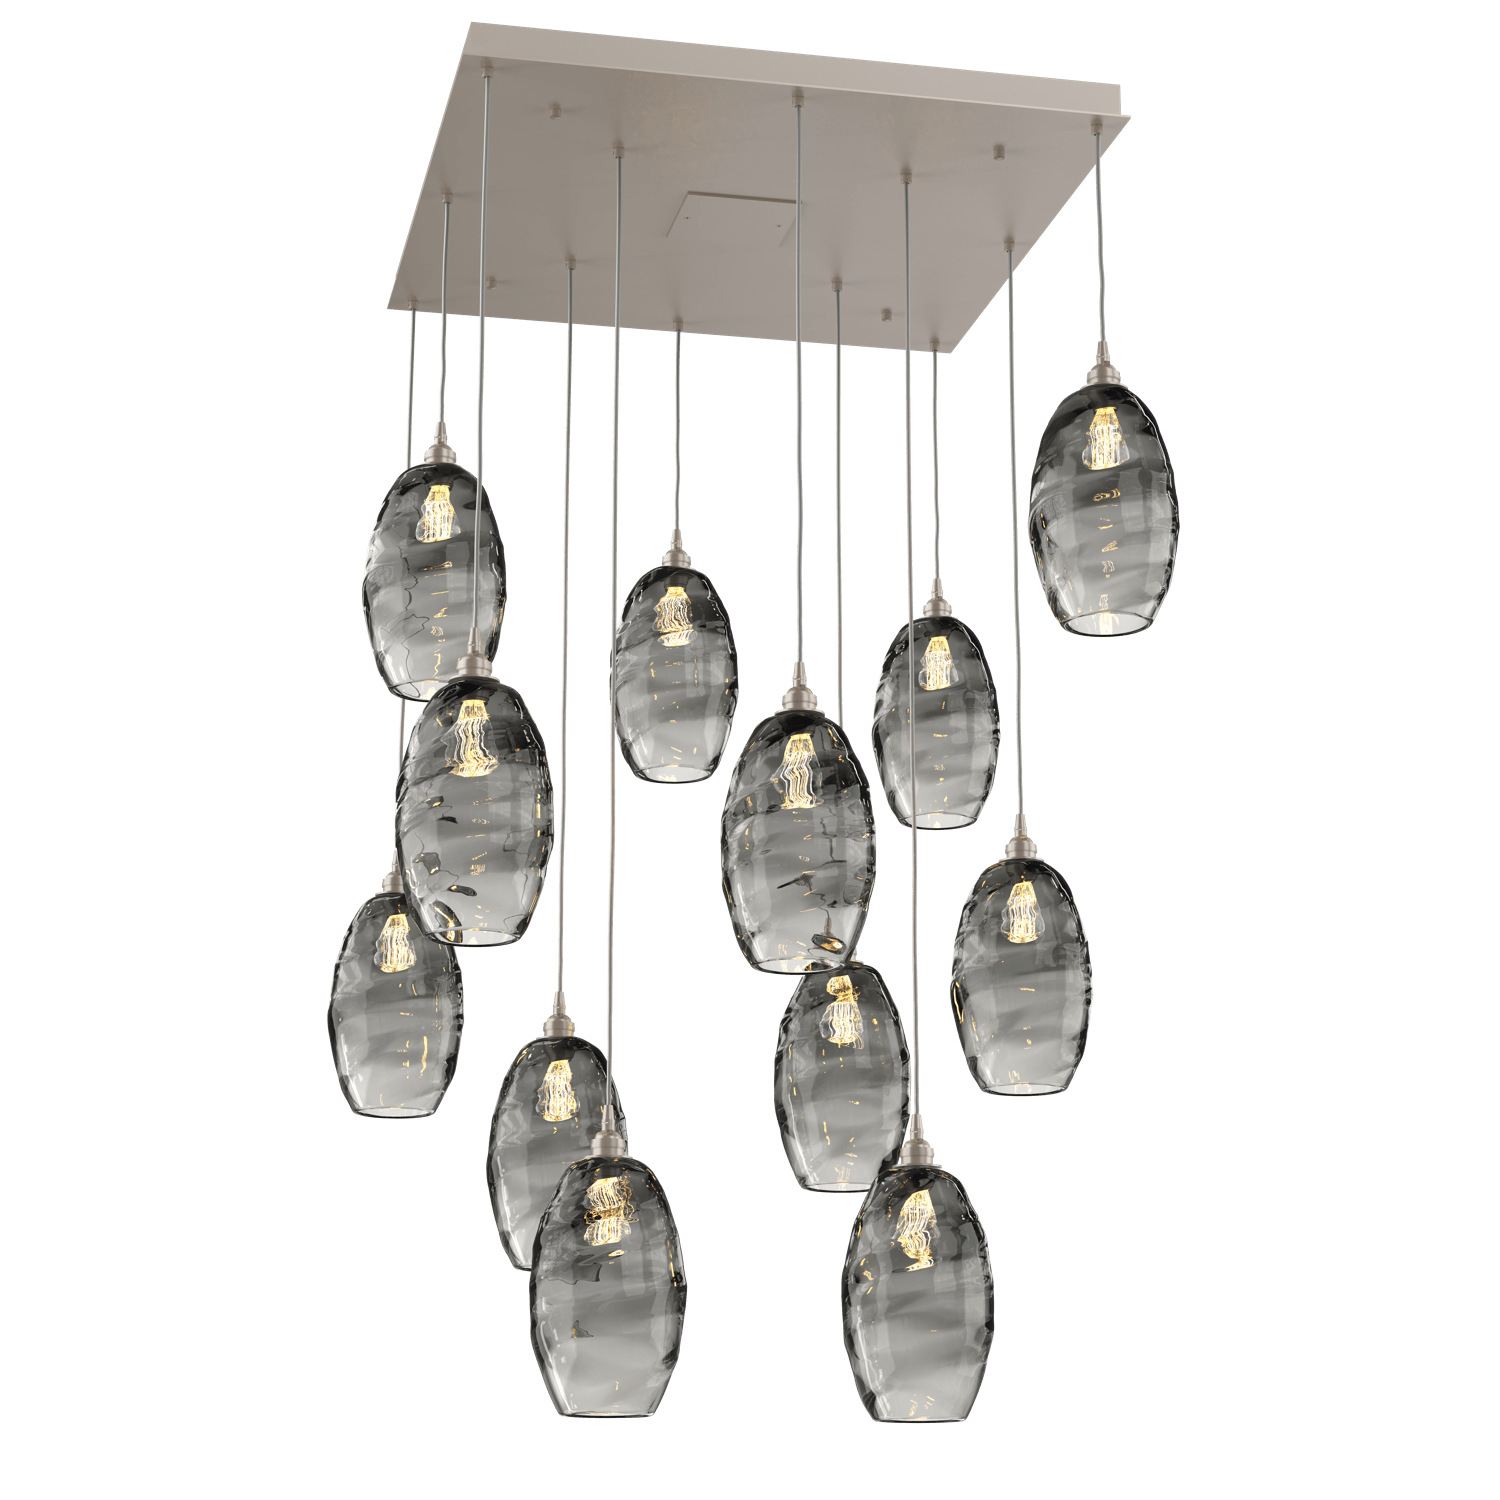 CHB0035-12-BS-OS-Hammerton-Studio-Optic-Blown-Glass-Elisse-12-light-square-pendant-chandelier-with-metallic-beige-silver-finish-and-optic-smoke-blown-glass-shades-and-incandescent-lamping